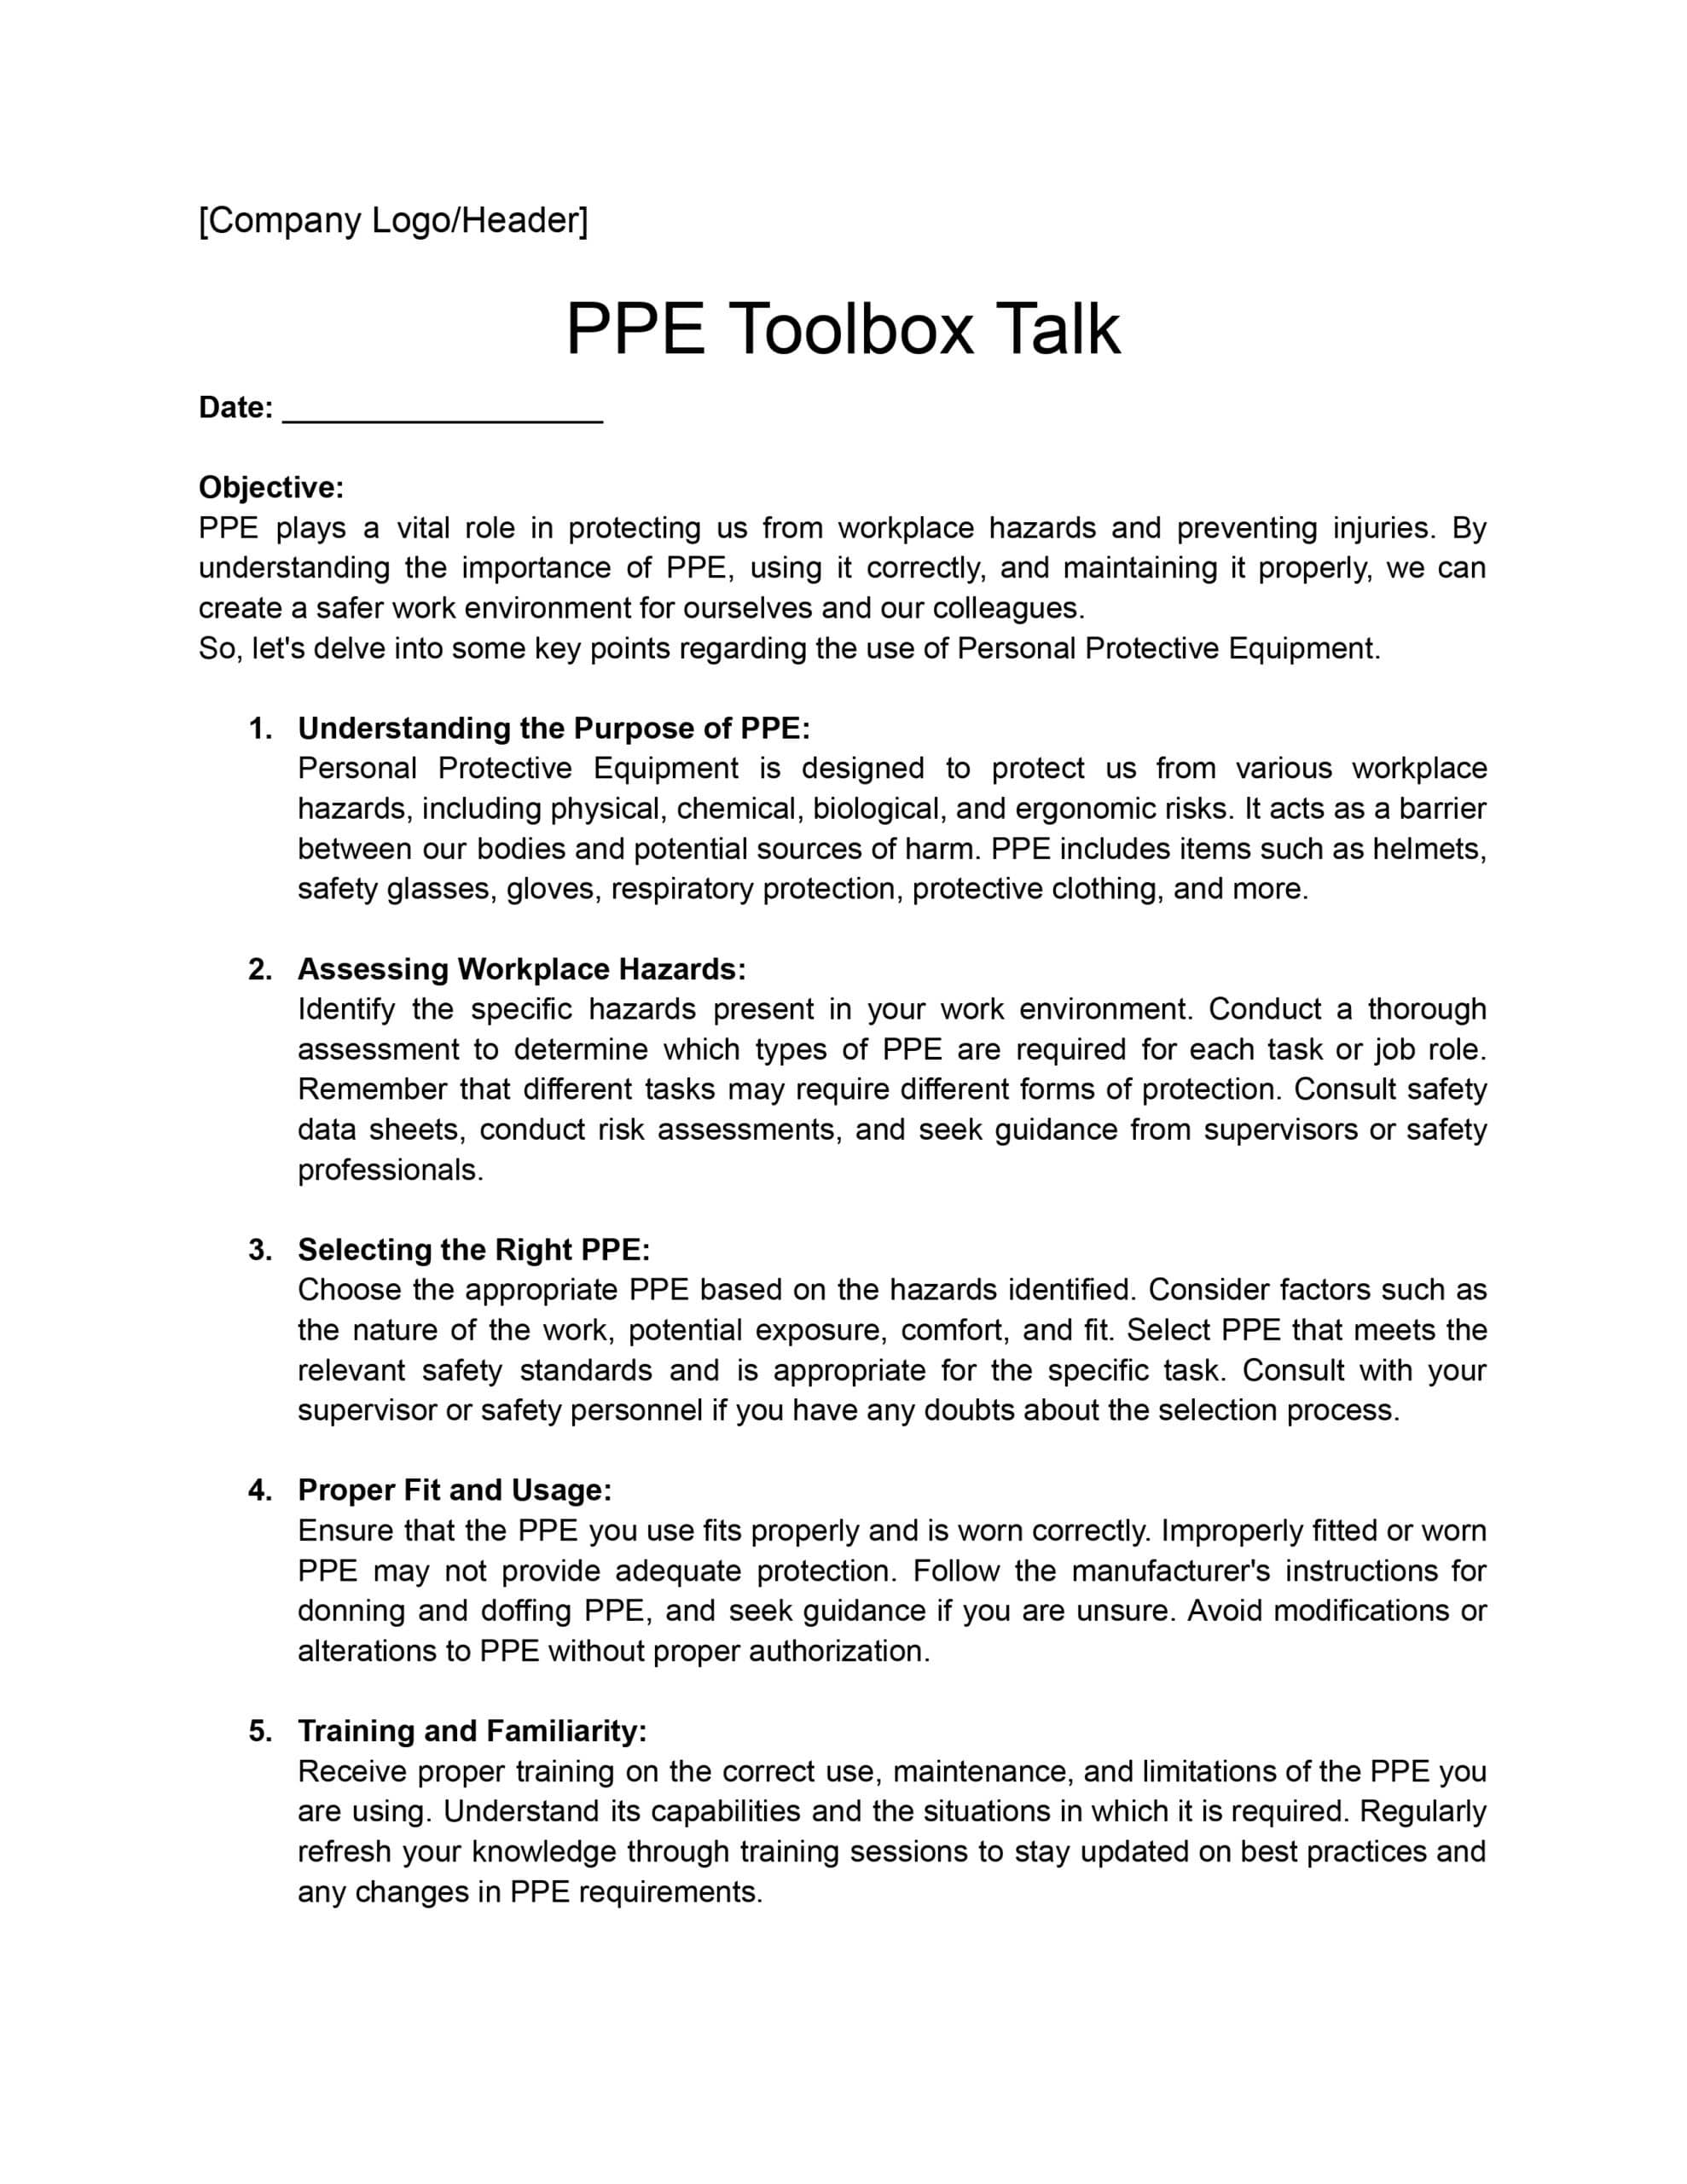 Toolbox Talk Templates: Download Print for Free